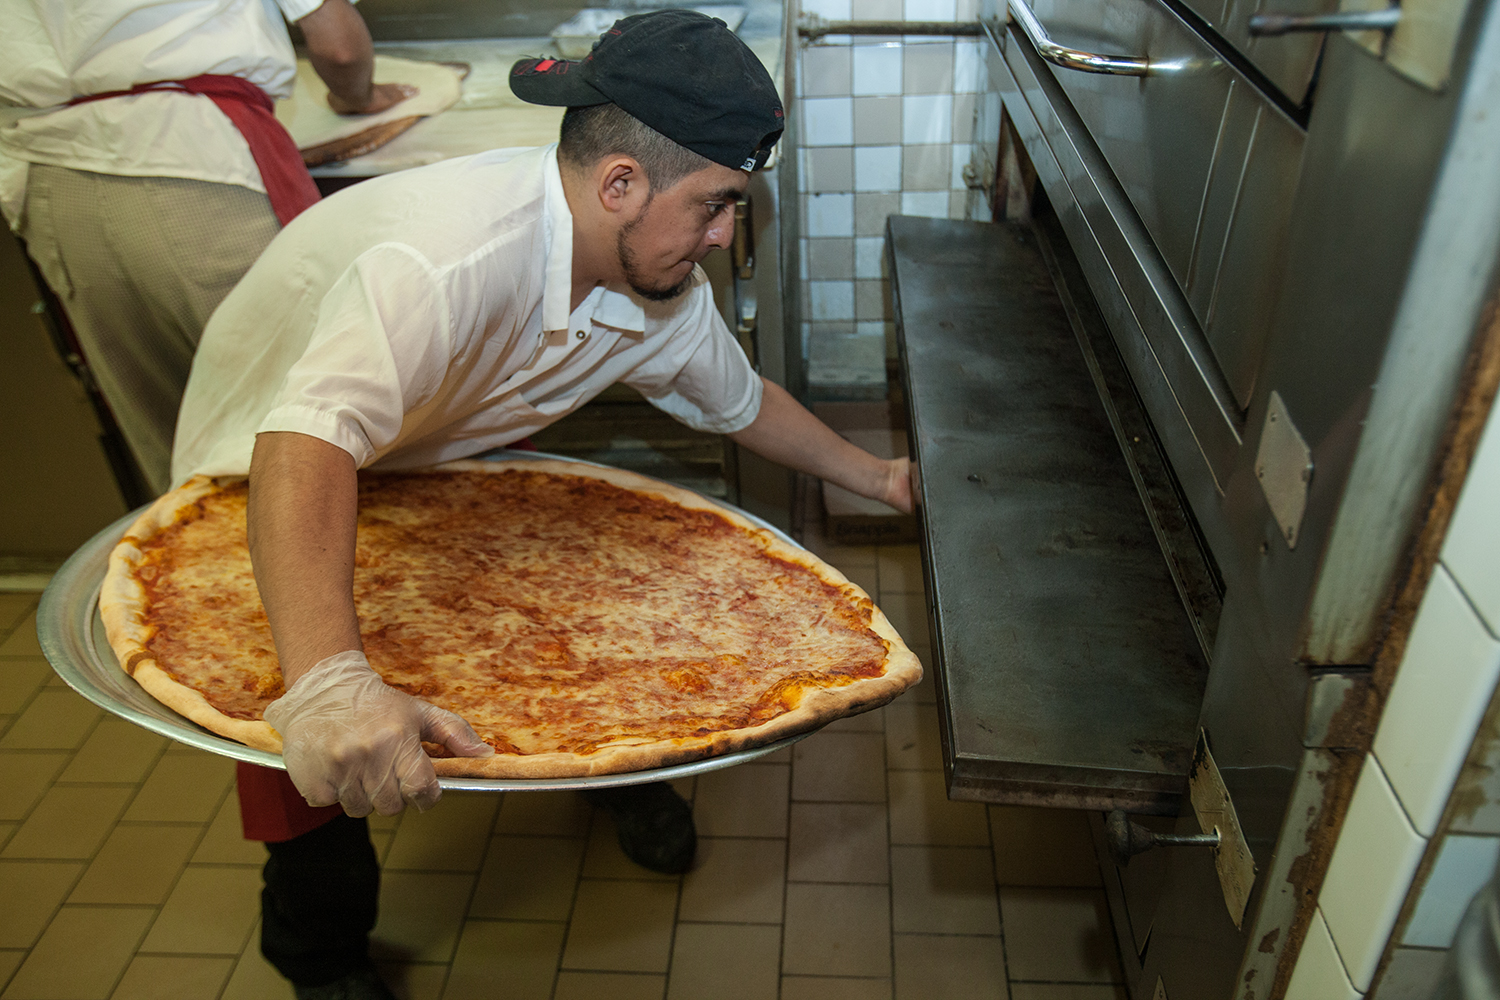  Pizzamen at Koronet combine solid gripping and body girth to maneuver pies into the oven. 